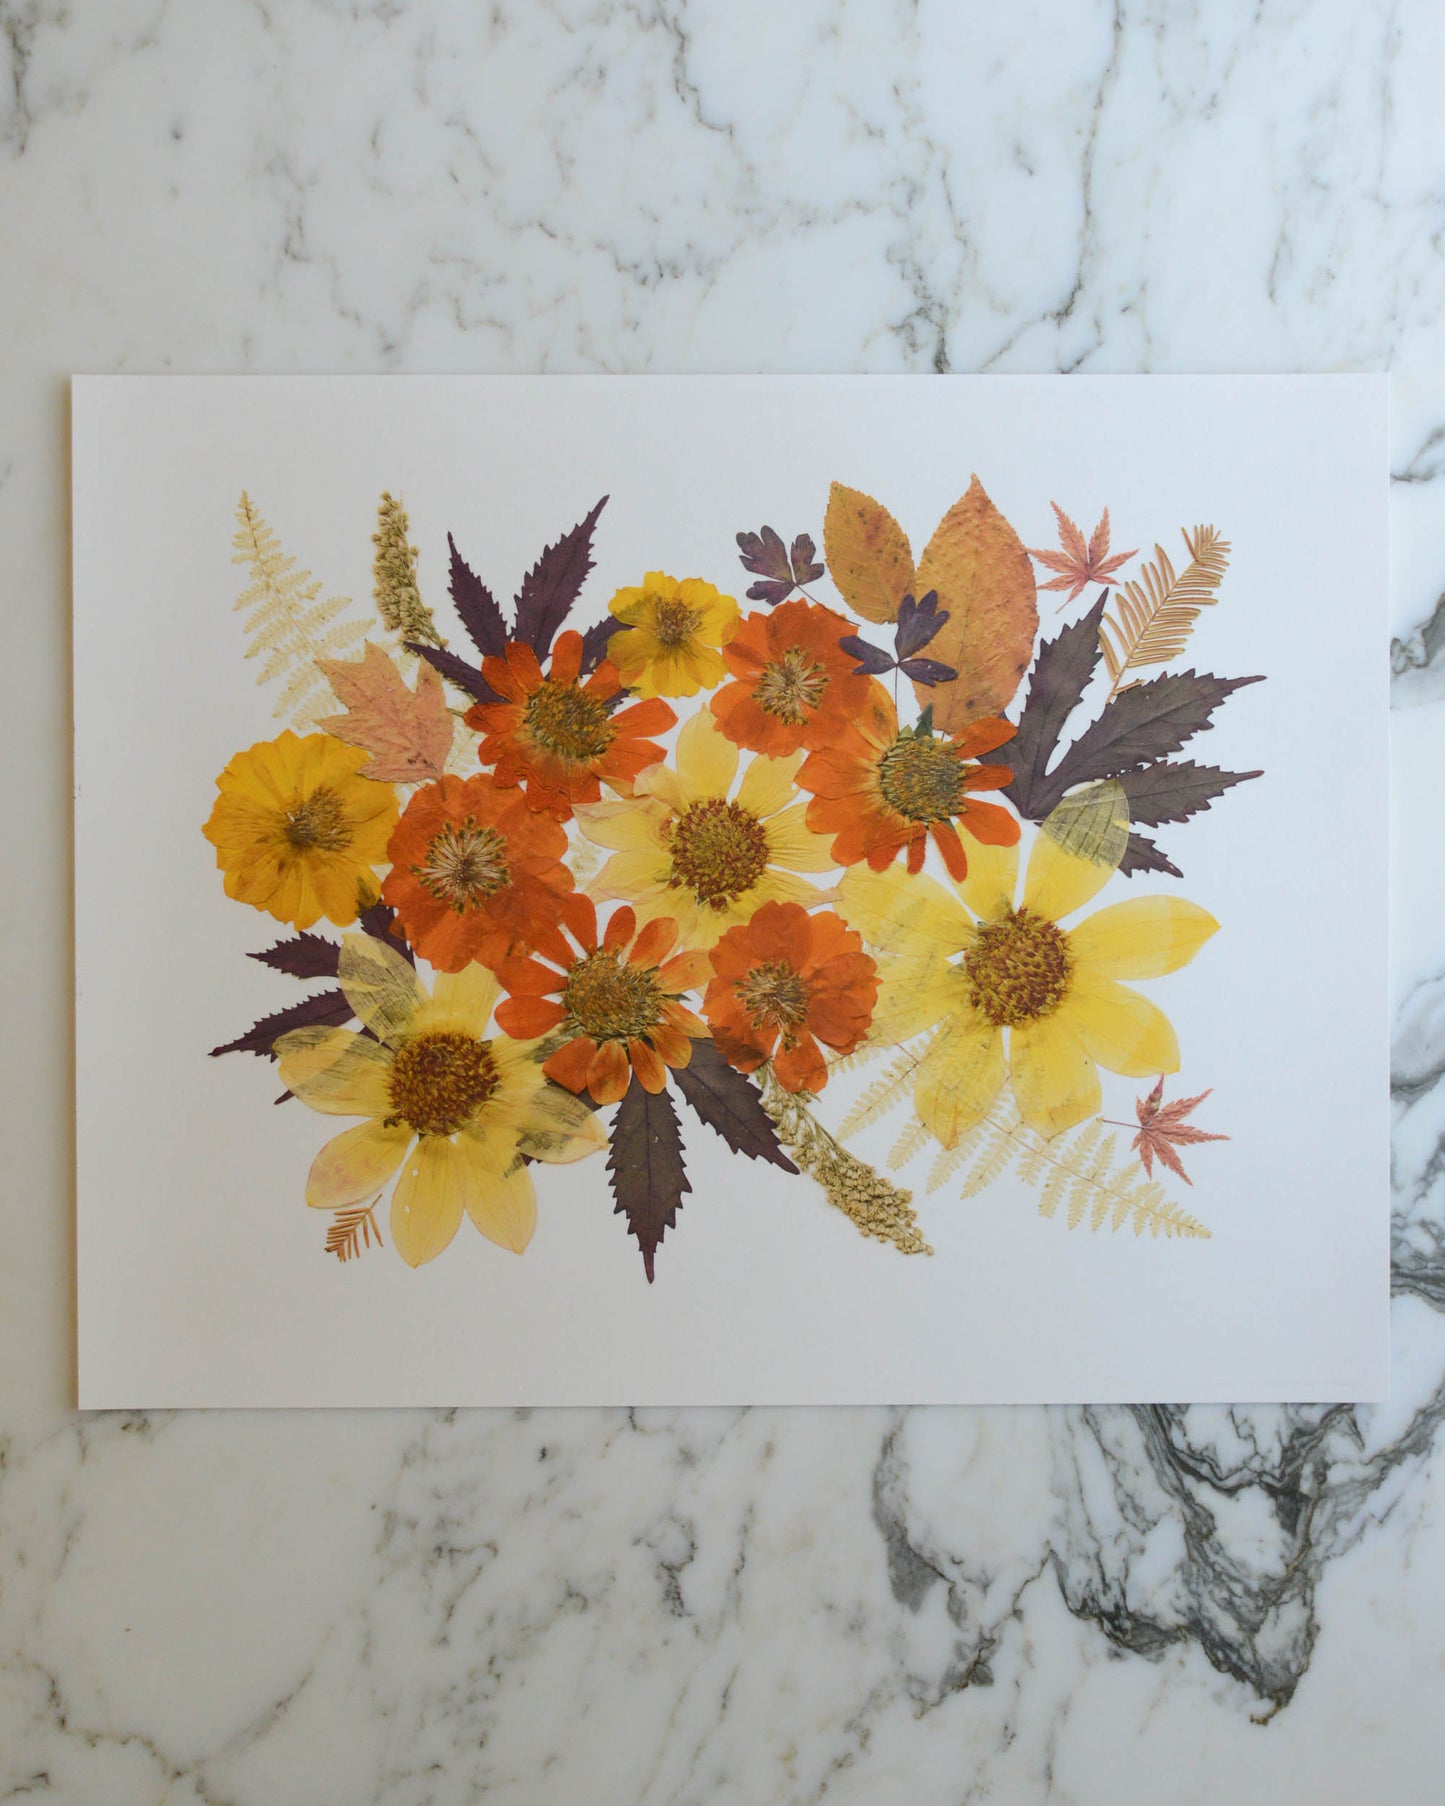 Four Seasons Bouquets - Art Print of Pressed Flowers